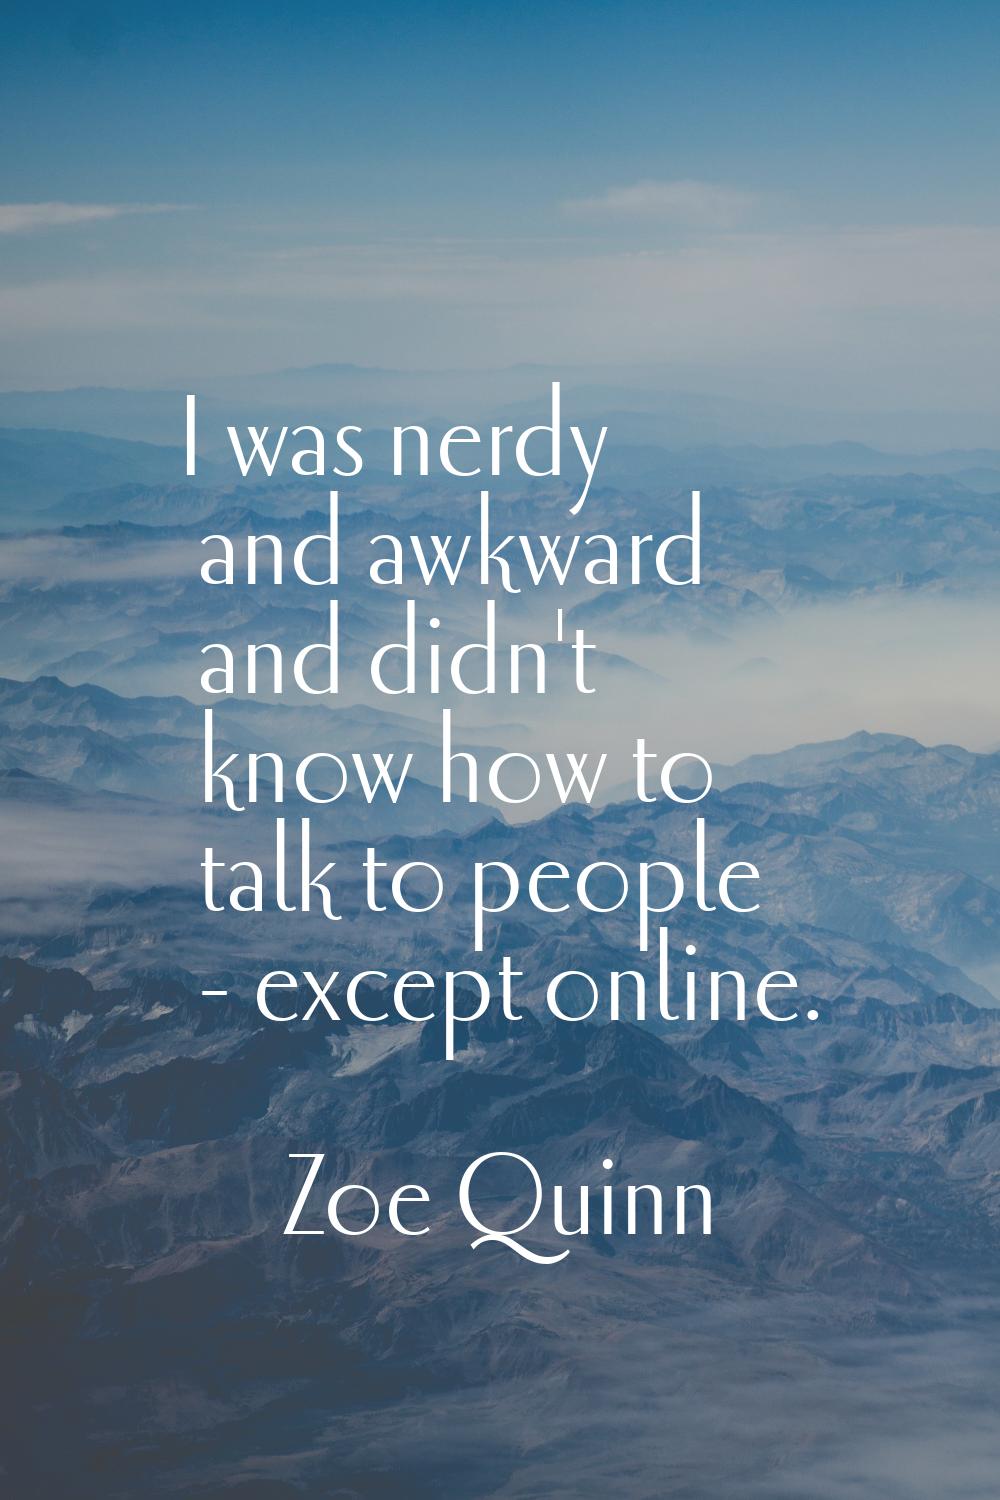 I was nerdy and awkward and didn't know how to talk to people - except online.